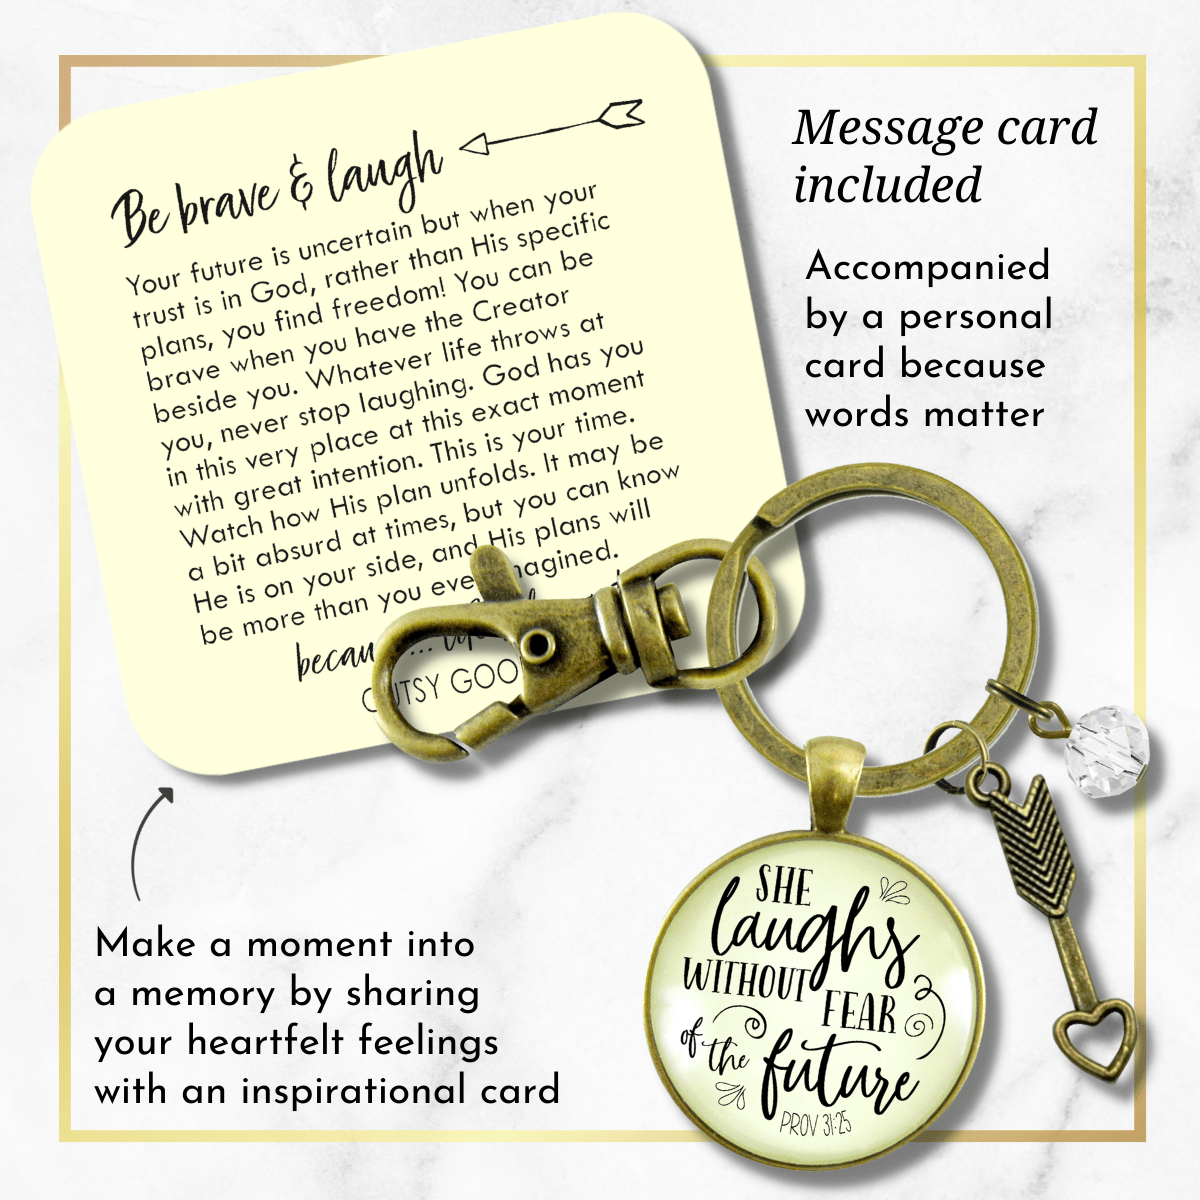 Faith Keychain She Laughs Without Fear Inspirational Pendant Jewelry For Women - Gutsy Goodness;Faith Keychain She Laughs Without Fear Inspirational Pendant Jewelry For Women - Gutsy Goodness Handmade Jewelry Gifts